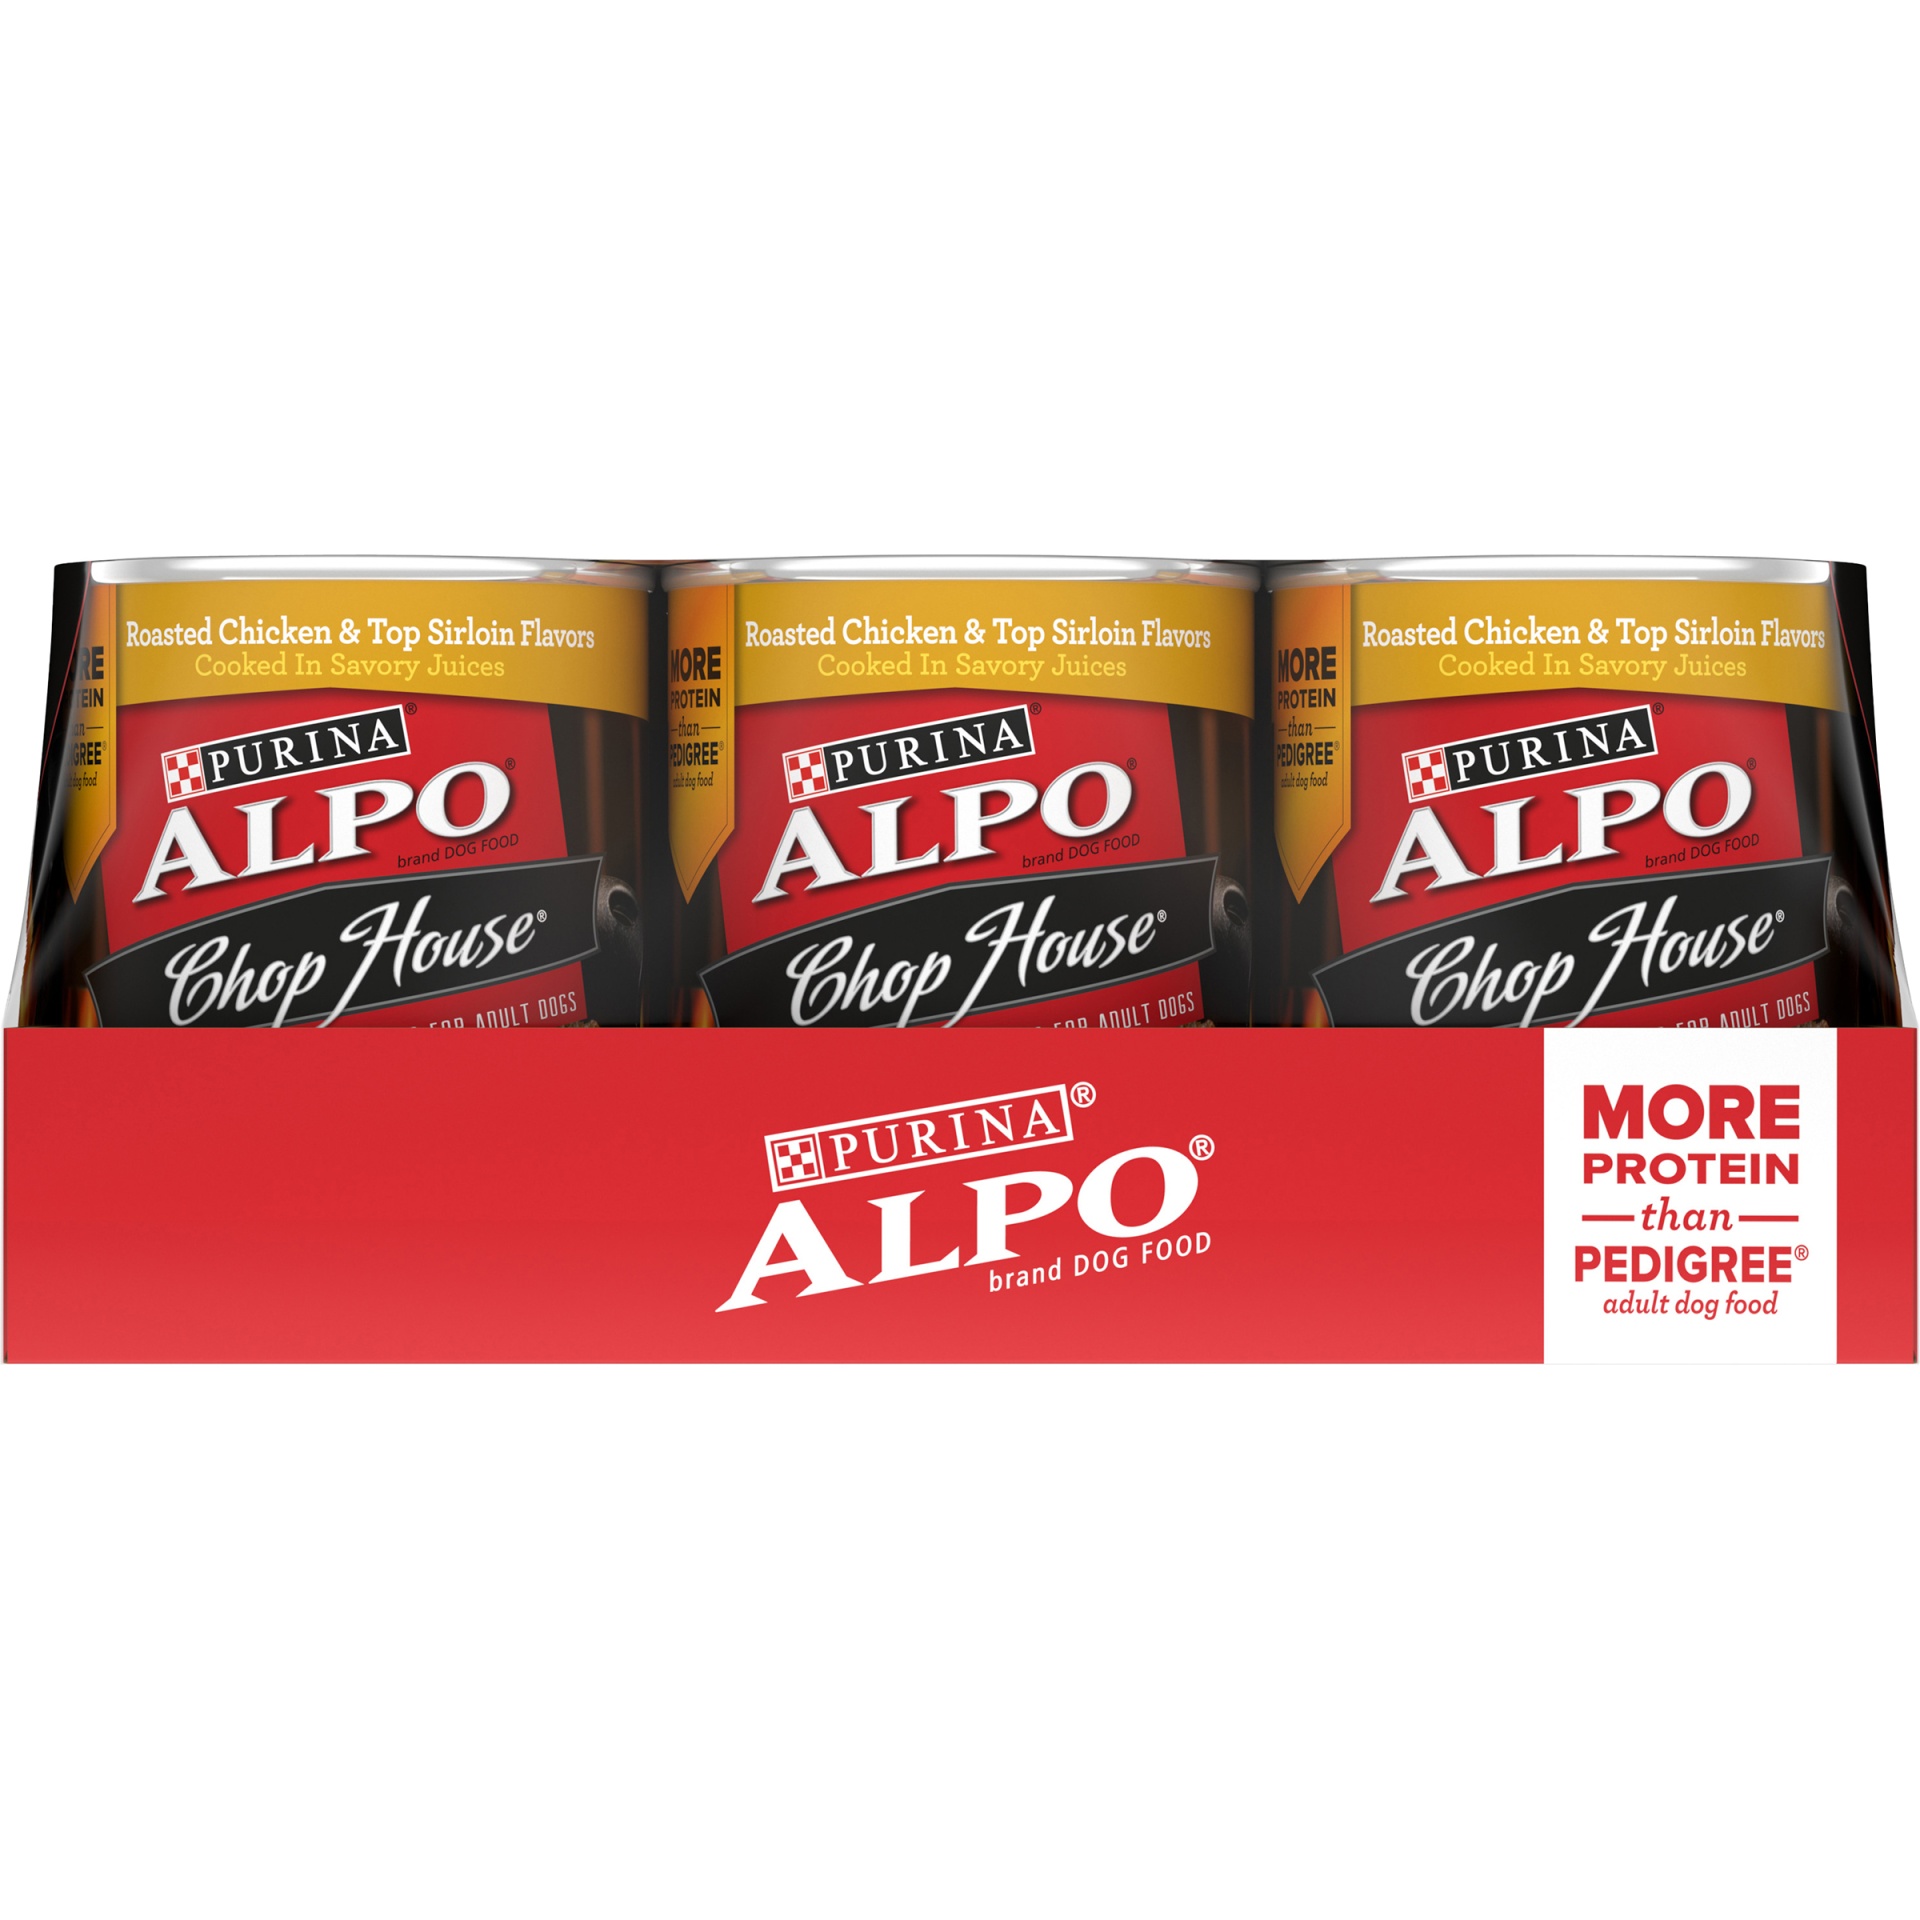 slide 5 of 9, ALPO Chophouse Variety Pack - Filet Mignon & Bacon and Roasted Chicken & Top Sirloin, 12 ct; 13.2 oz